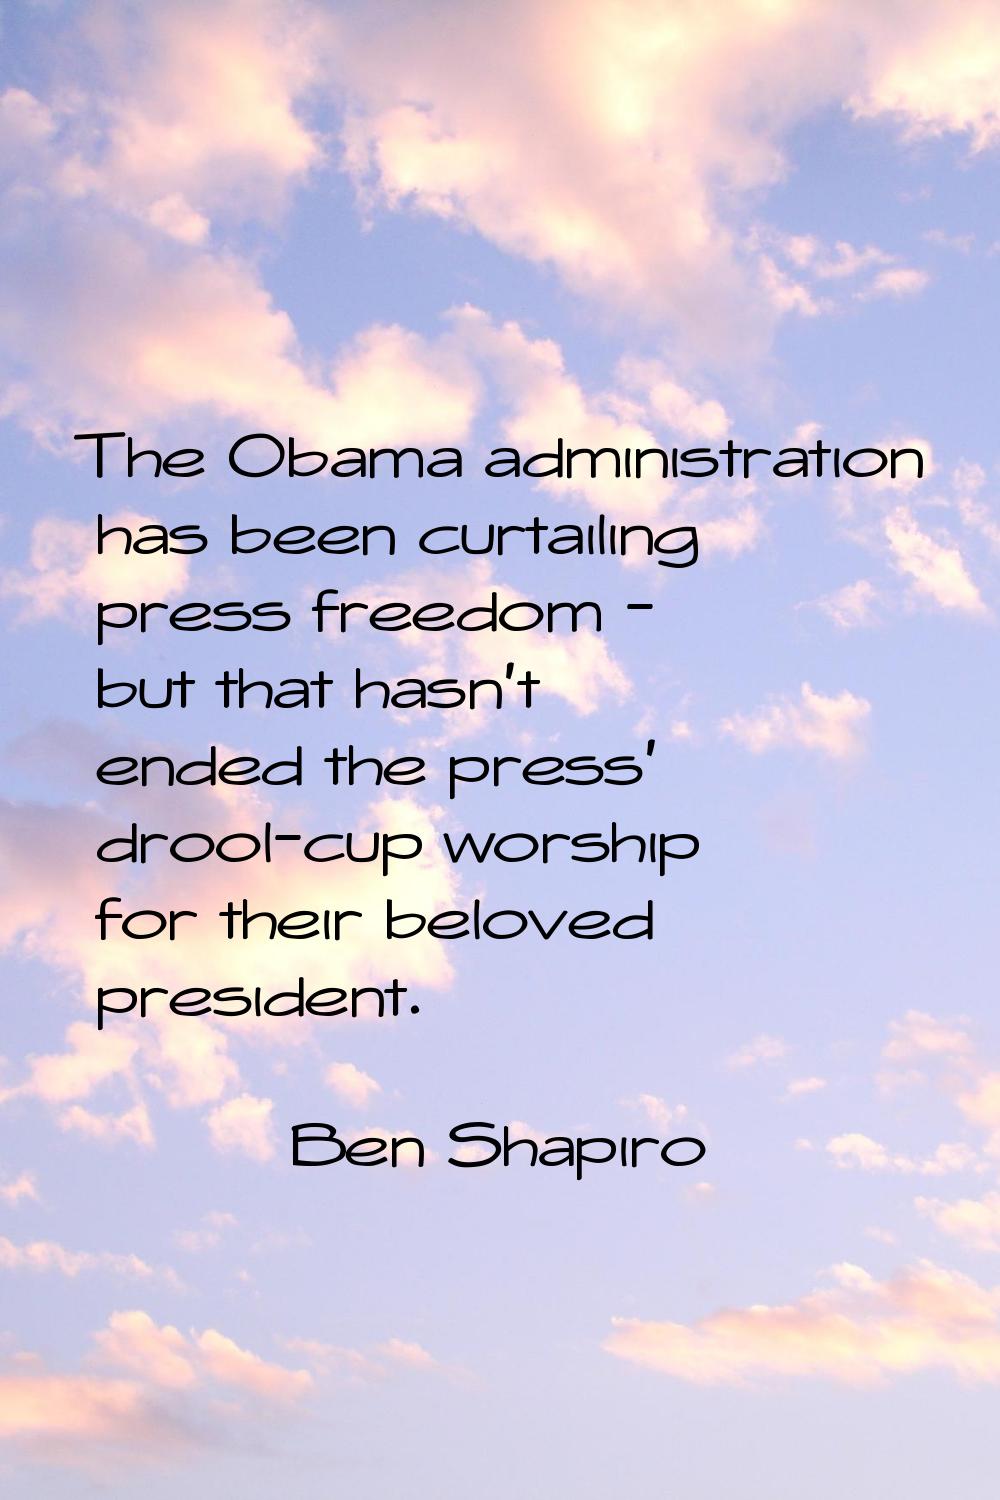 The Obama administration has been curtailing press freedom - but that hasn't ended the press' drool